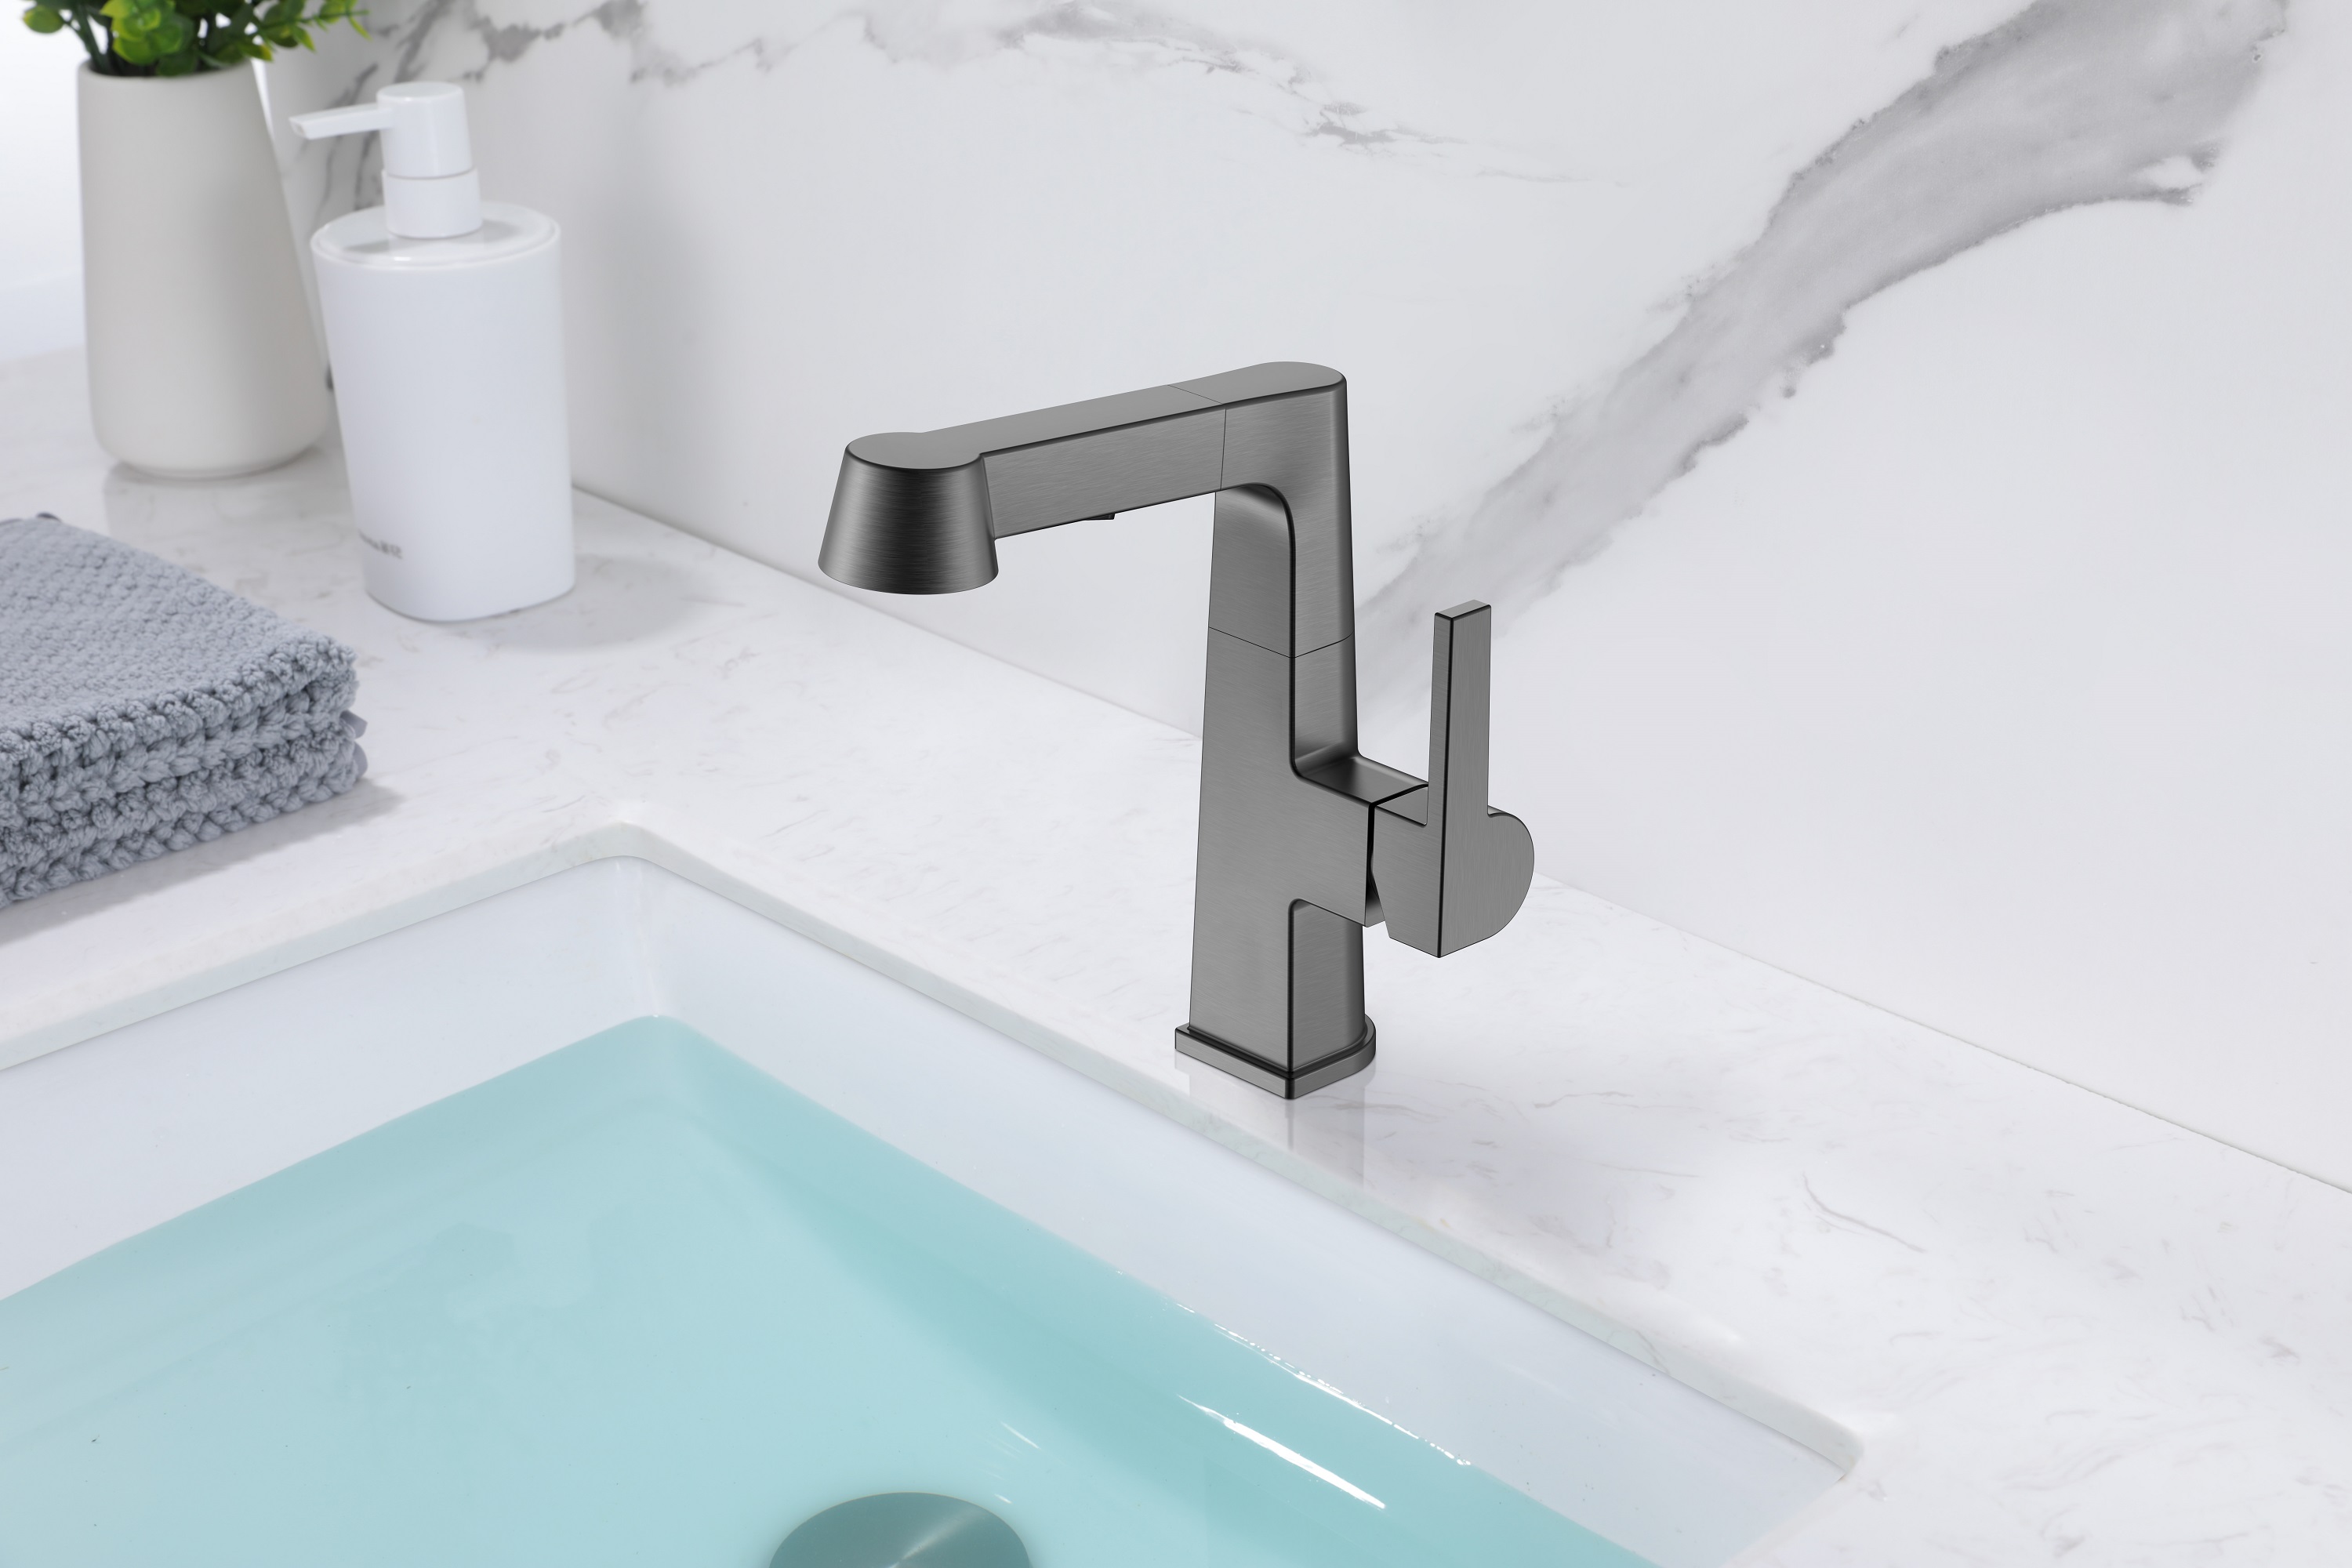 Square Adjustable Hieght Chrome Bathroom Faucet Pull Out Bathroom Faucet